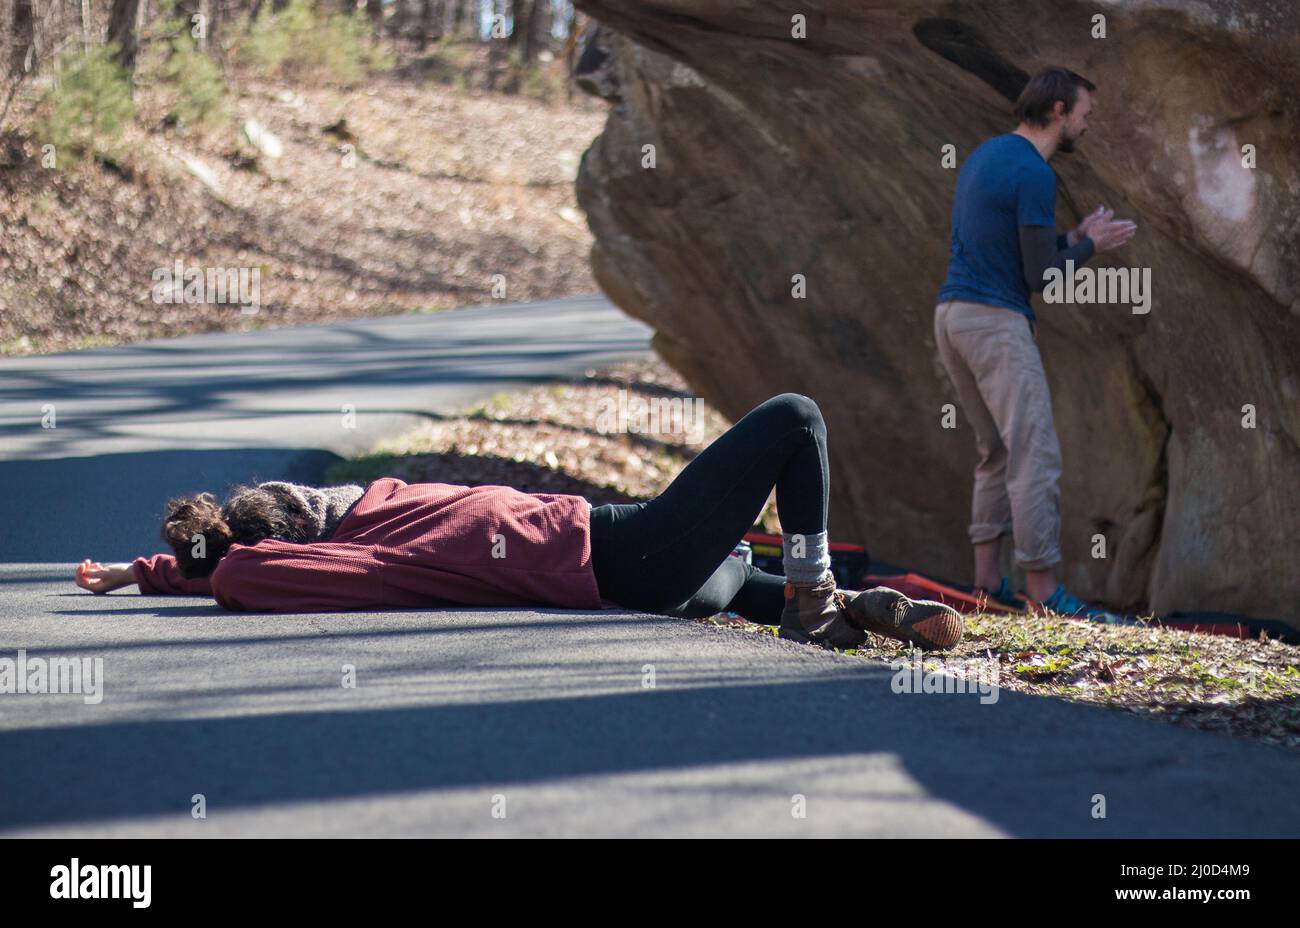 Outdoorsy woman lying on road outdoors films rock climber starting a climb Stock Photo